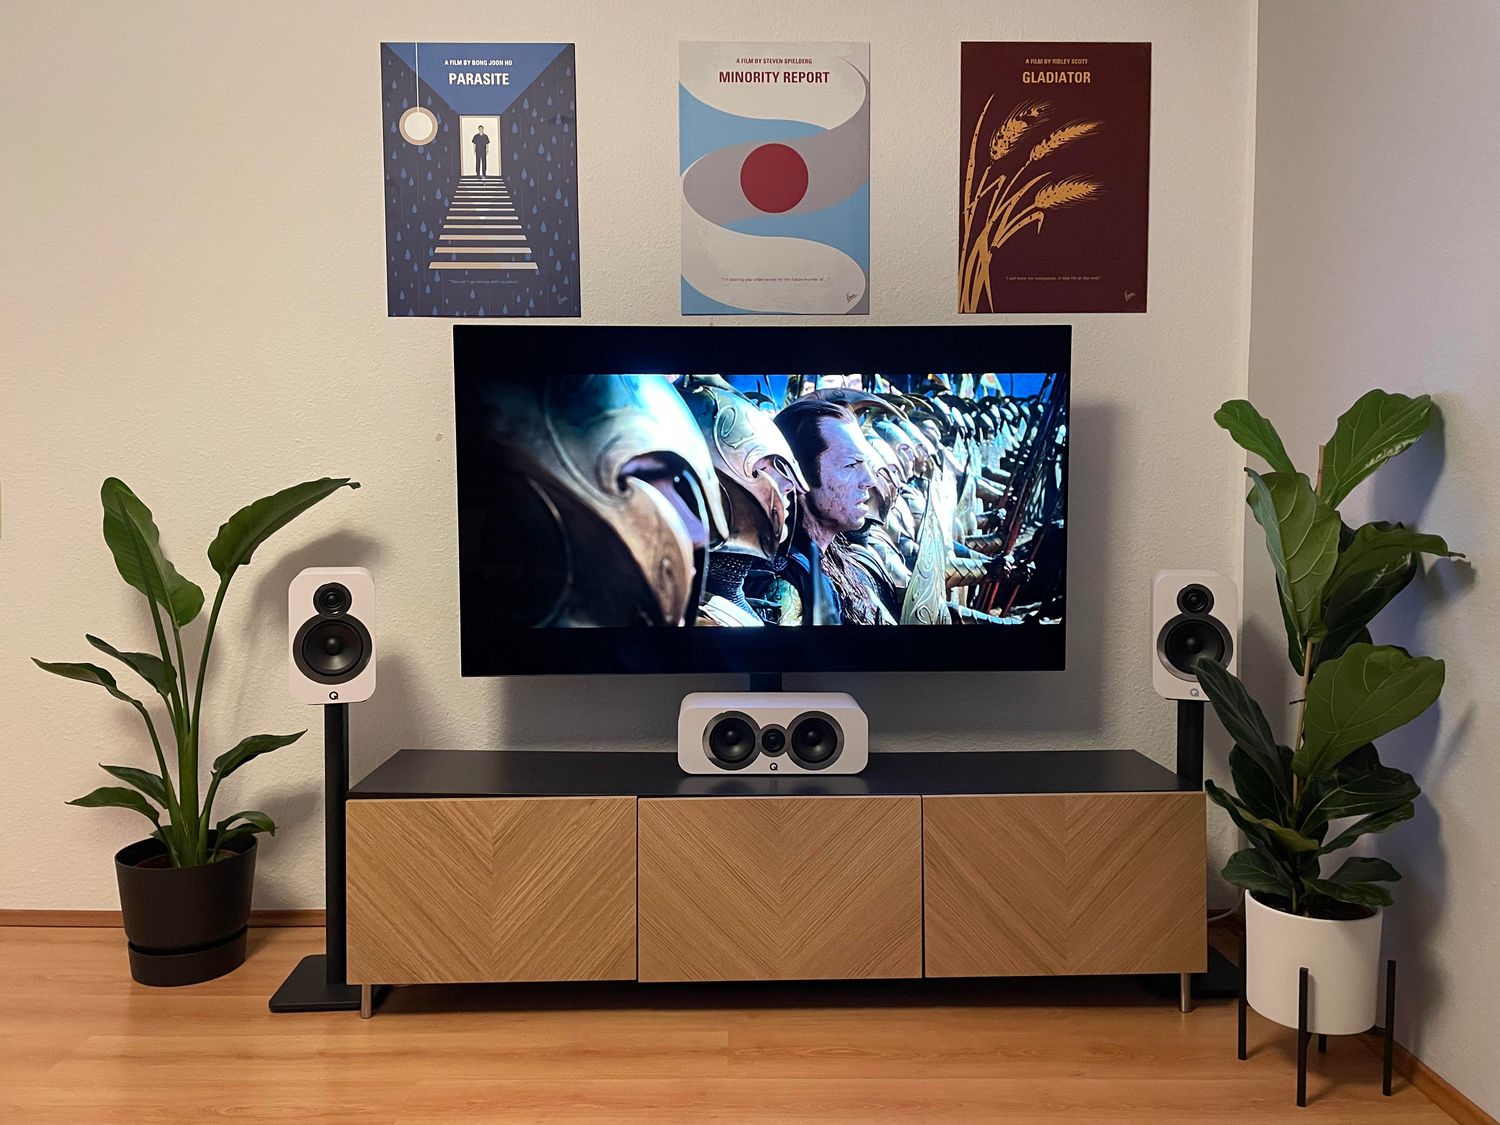 How To Pair Sound Bar With TV